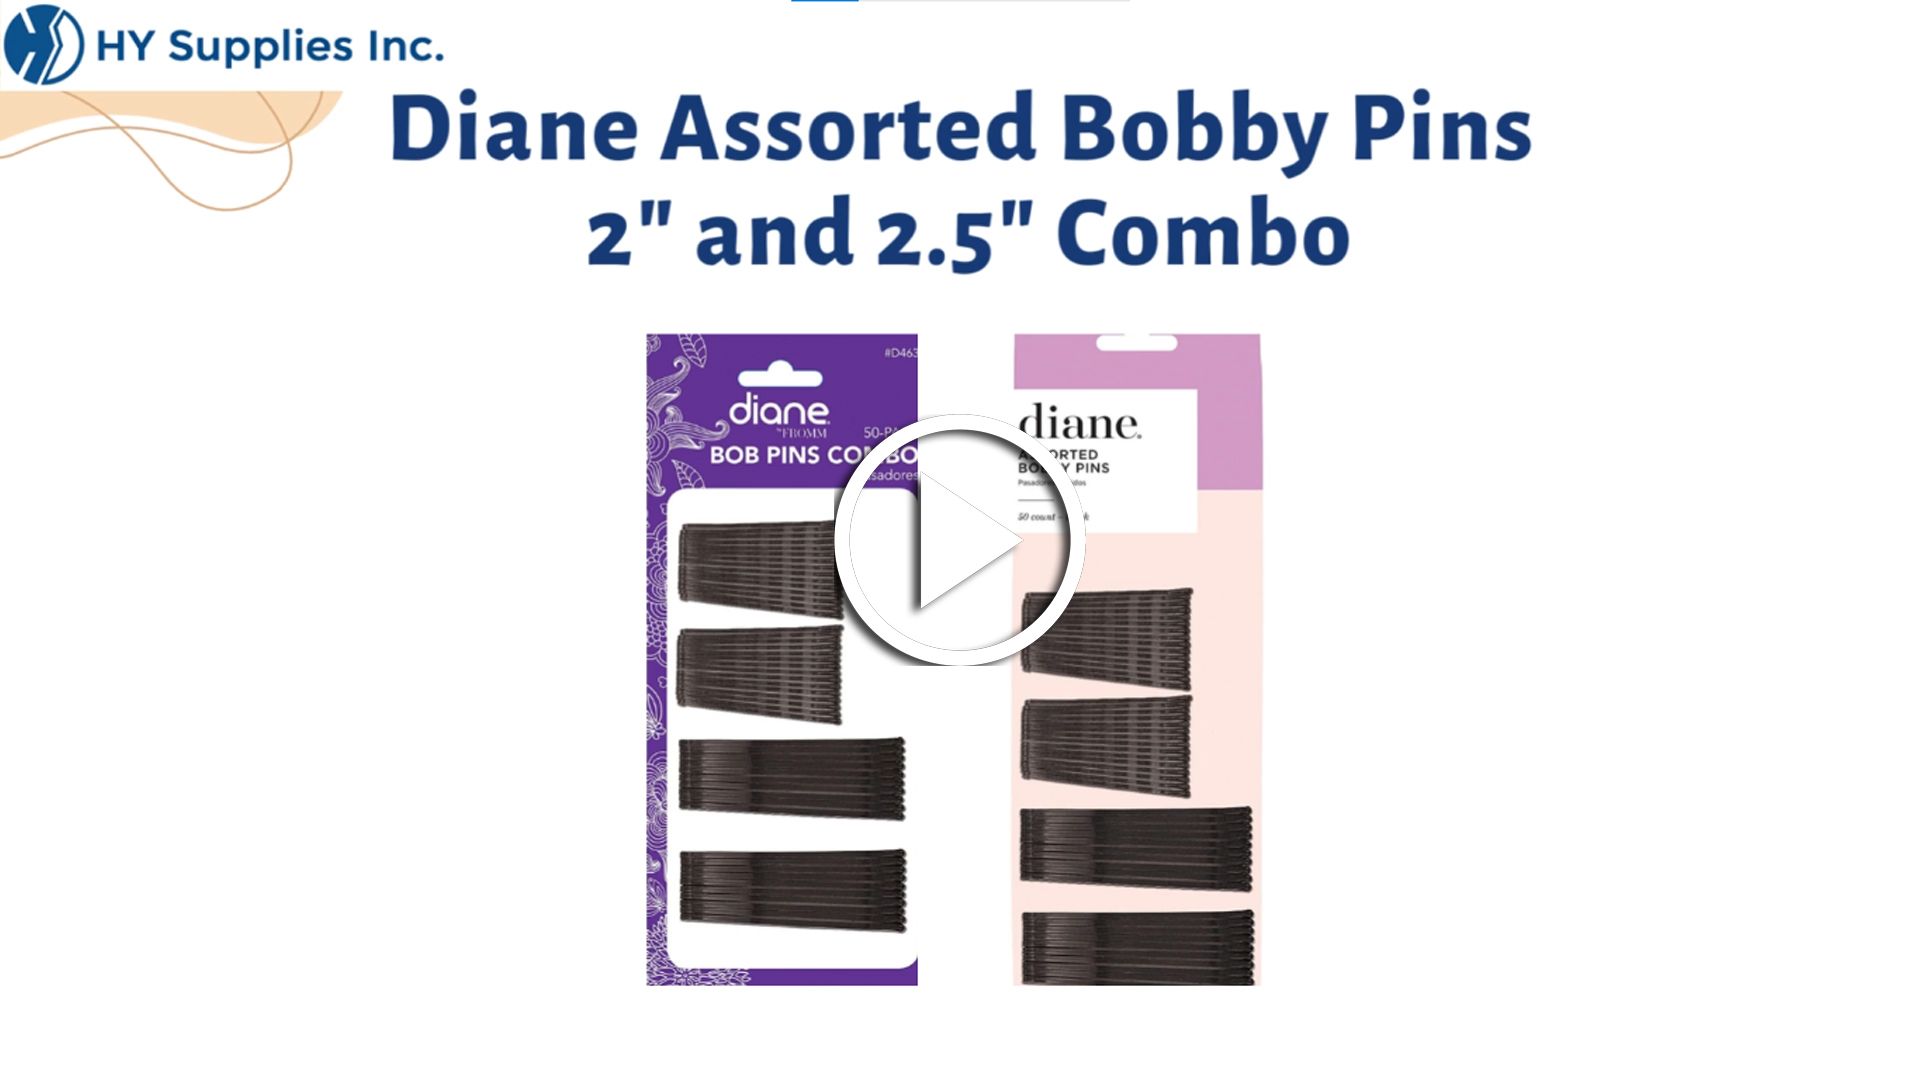 Diane Assorted Bobby Pins 2"and 2.5"Combo